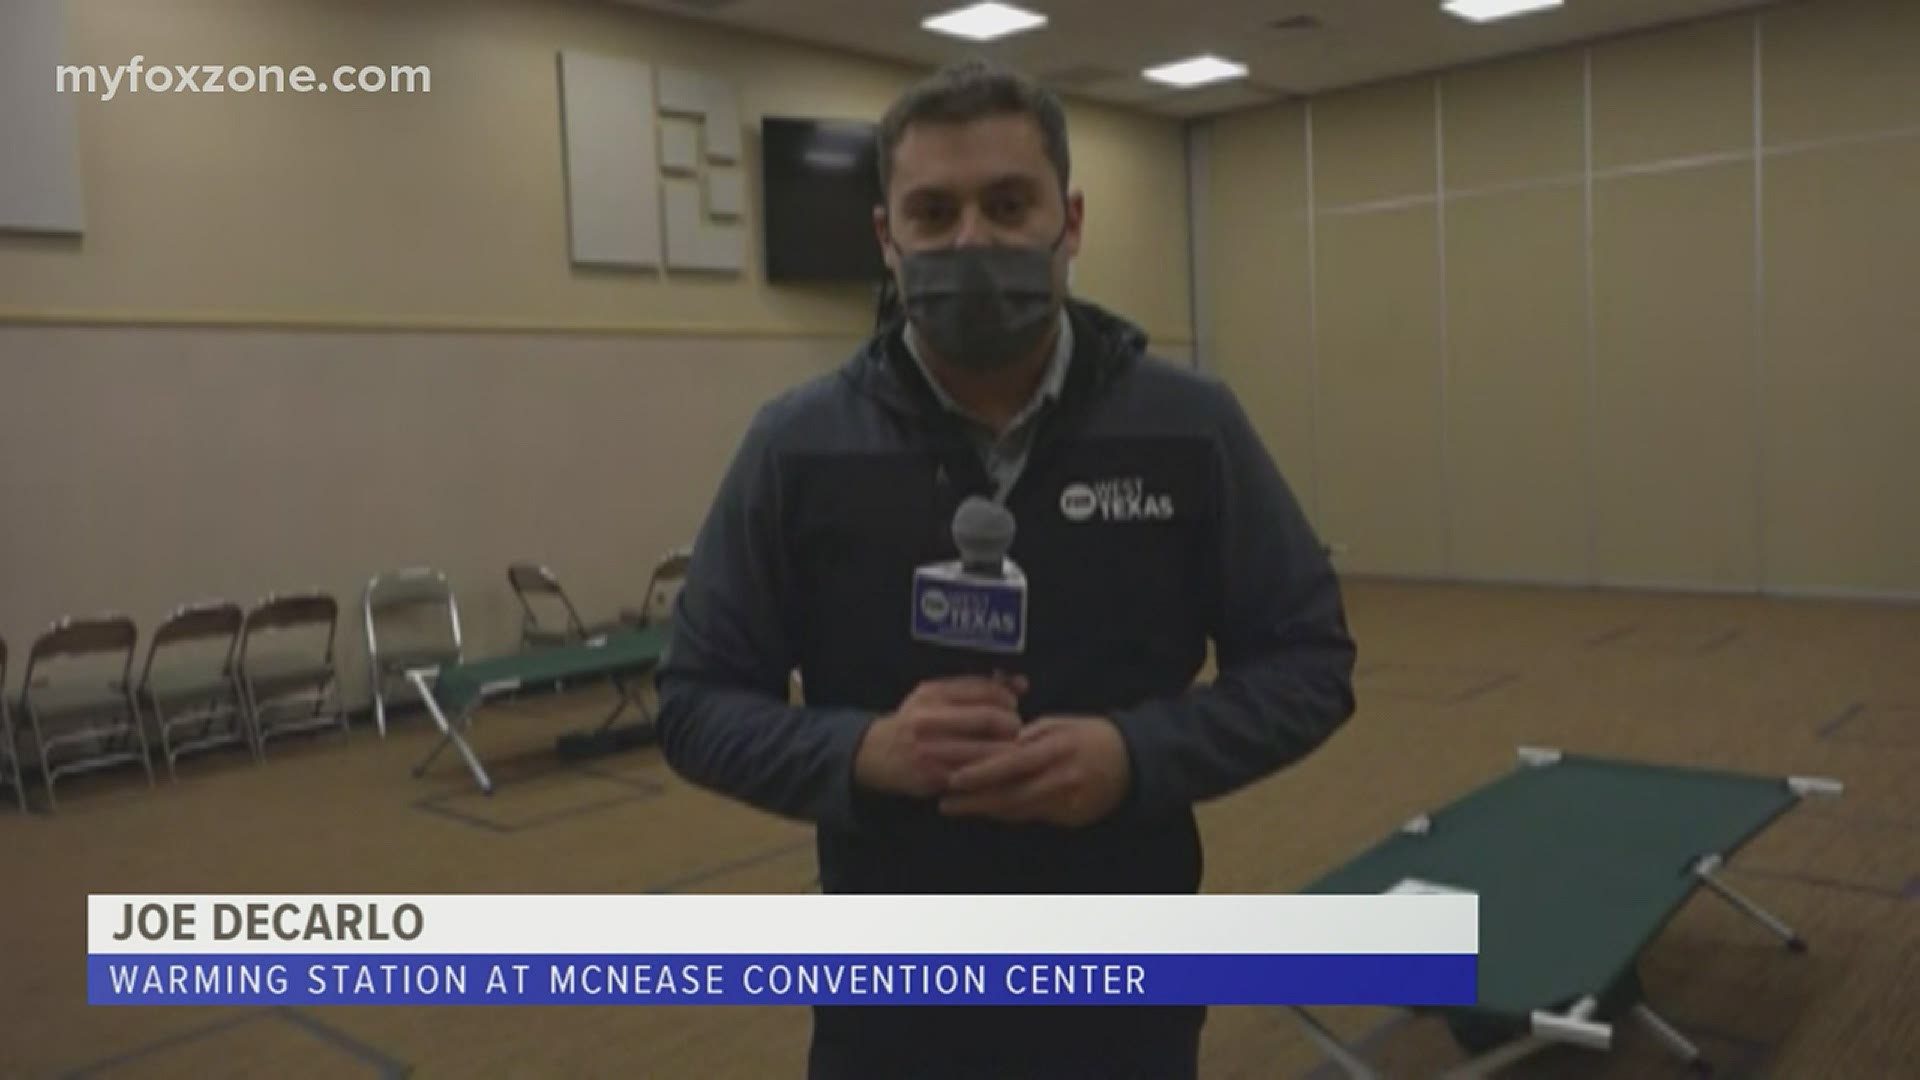 The City of San Angelo has opened up the McNease Convention Center for residents to stay the night in warmth. Our Joe DeCarlo has a report from there tonight.